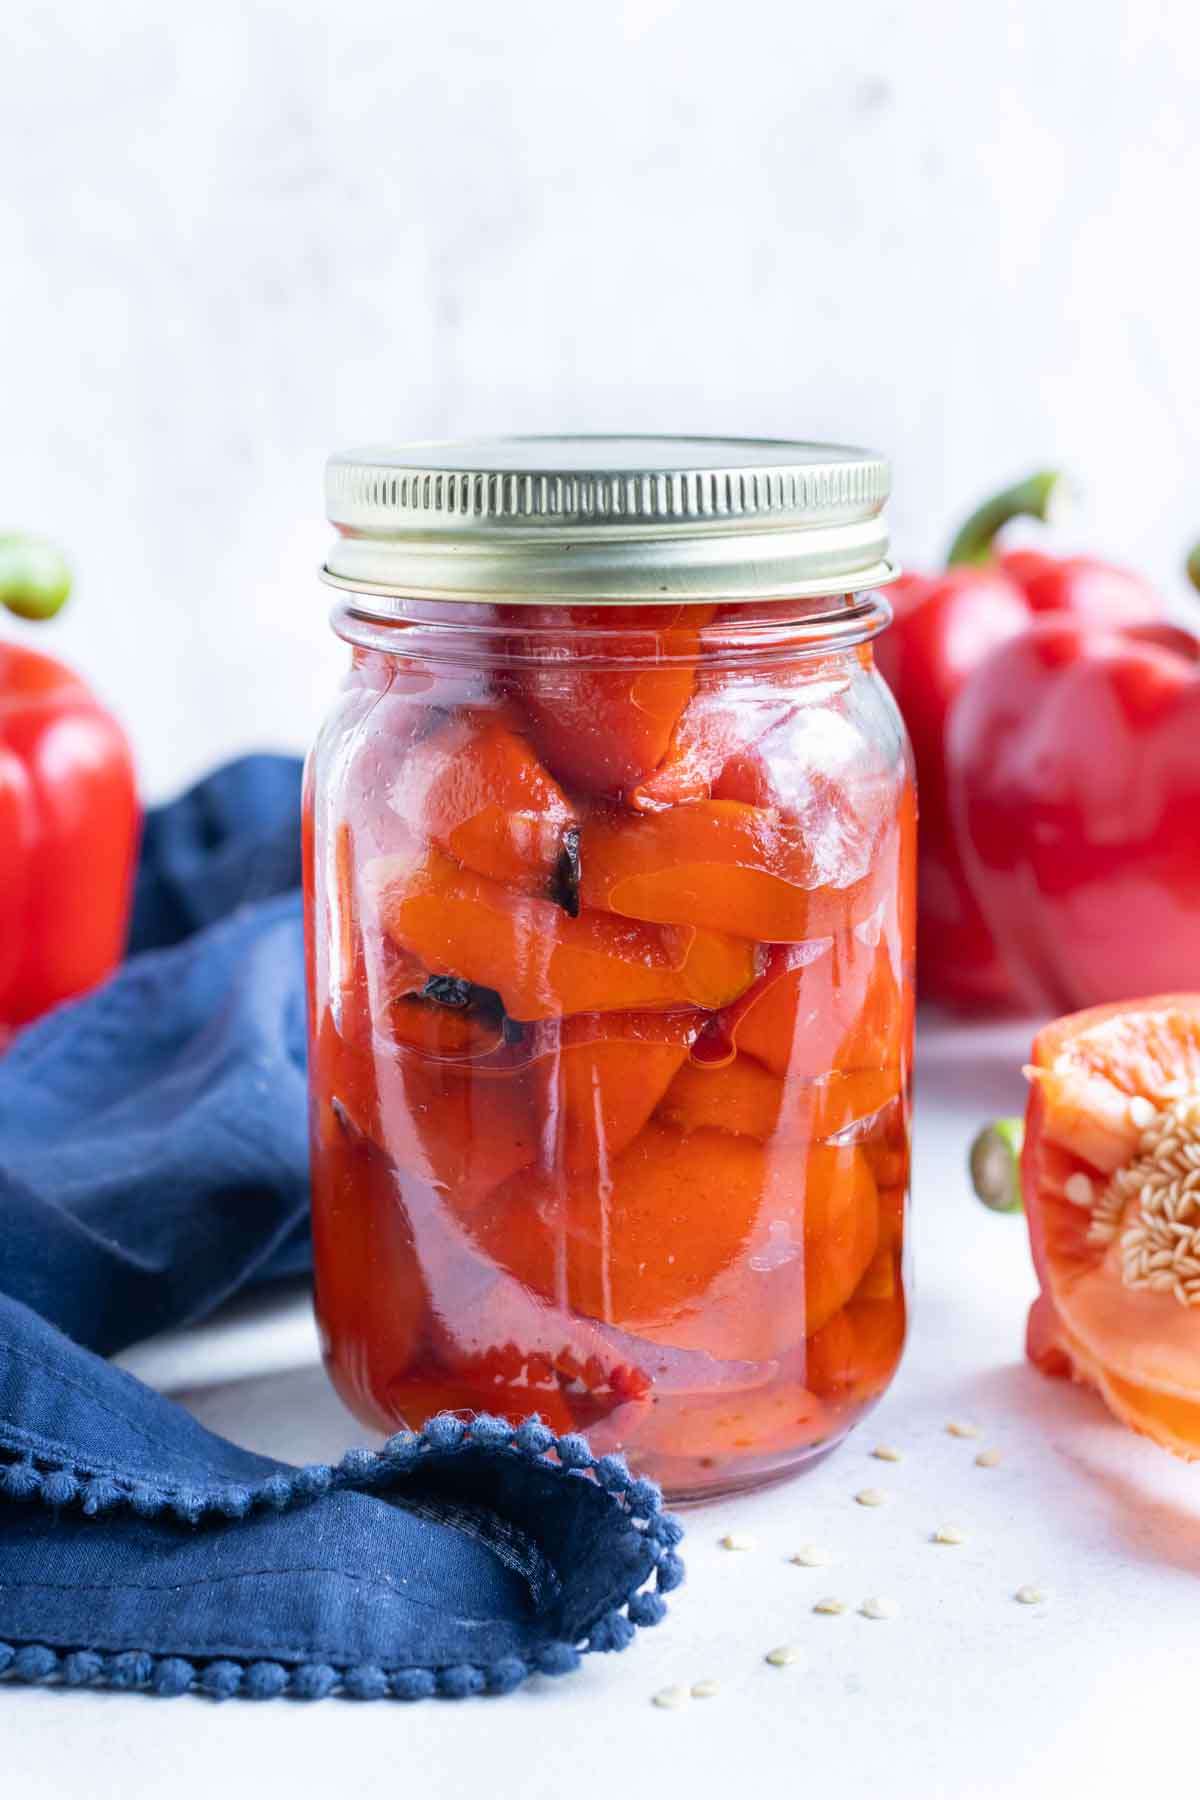 A sealed jar with roasted peppers.